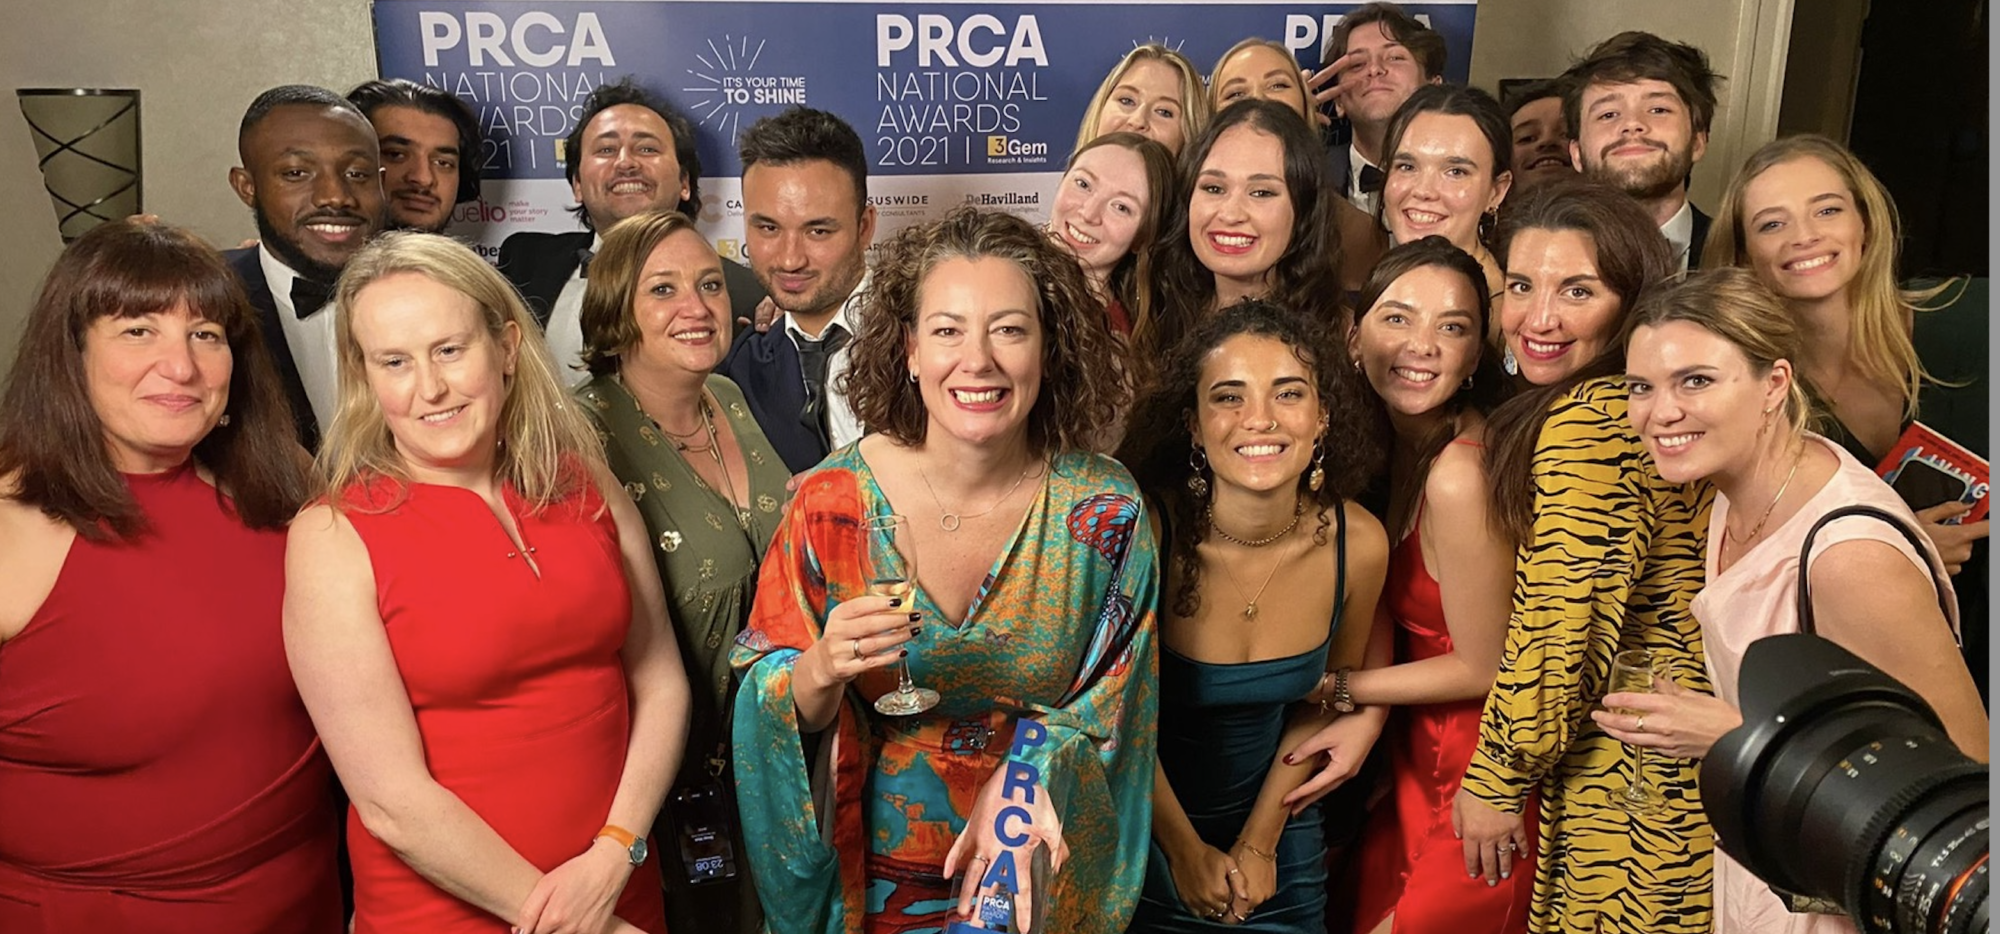 Photo from PRCA national awards